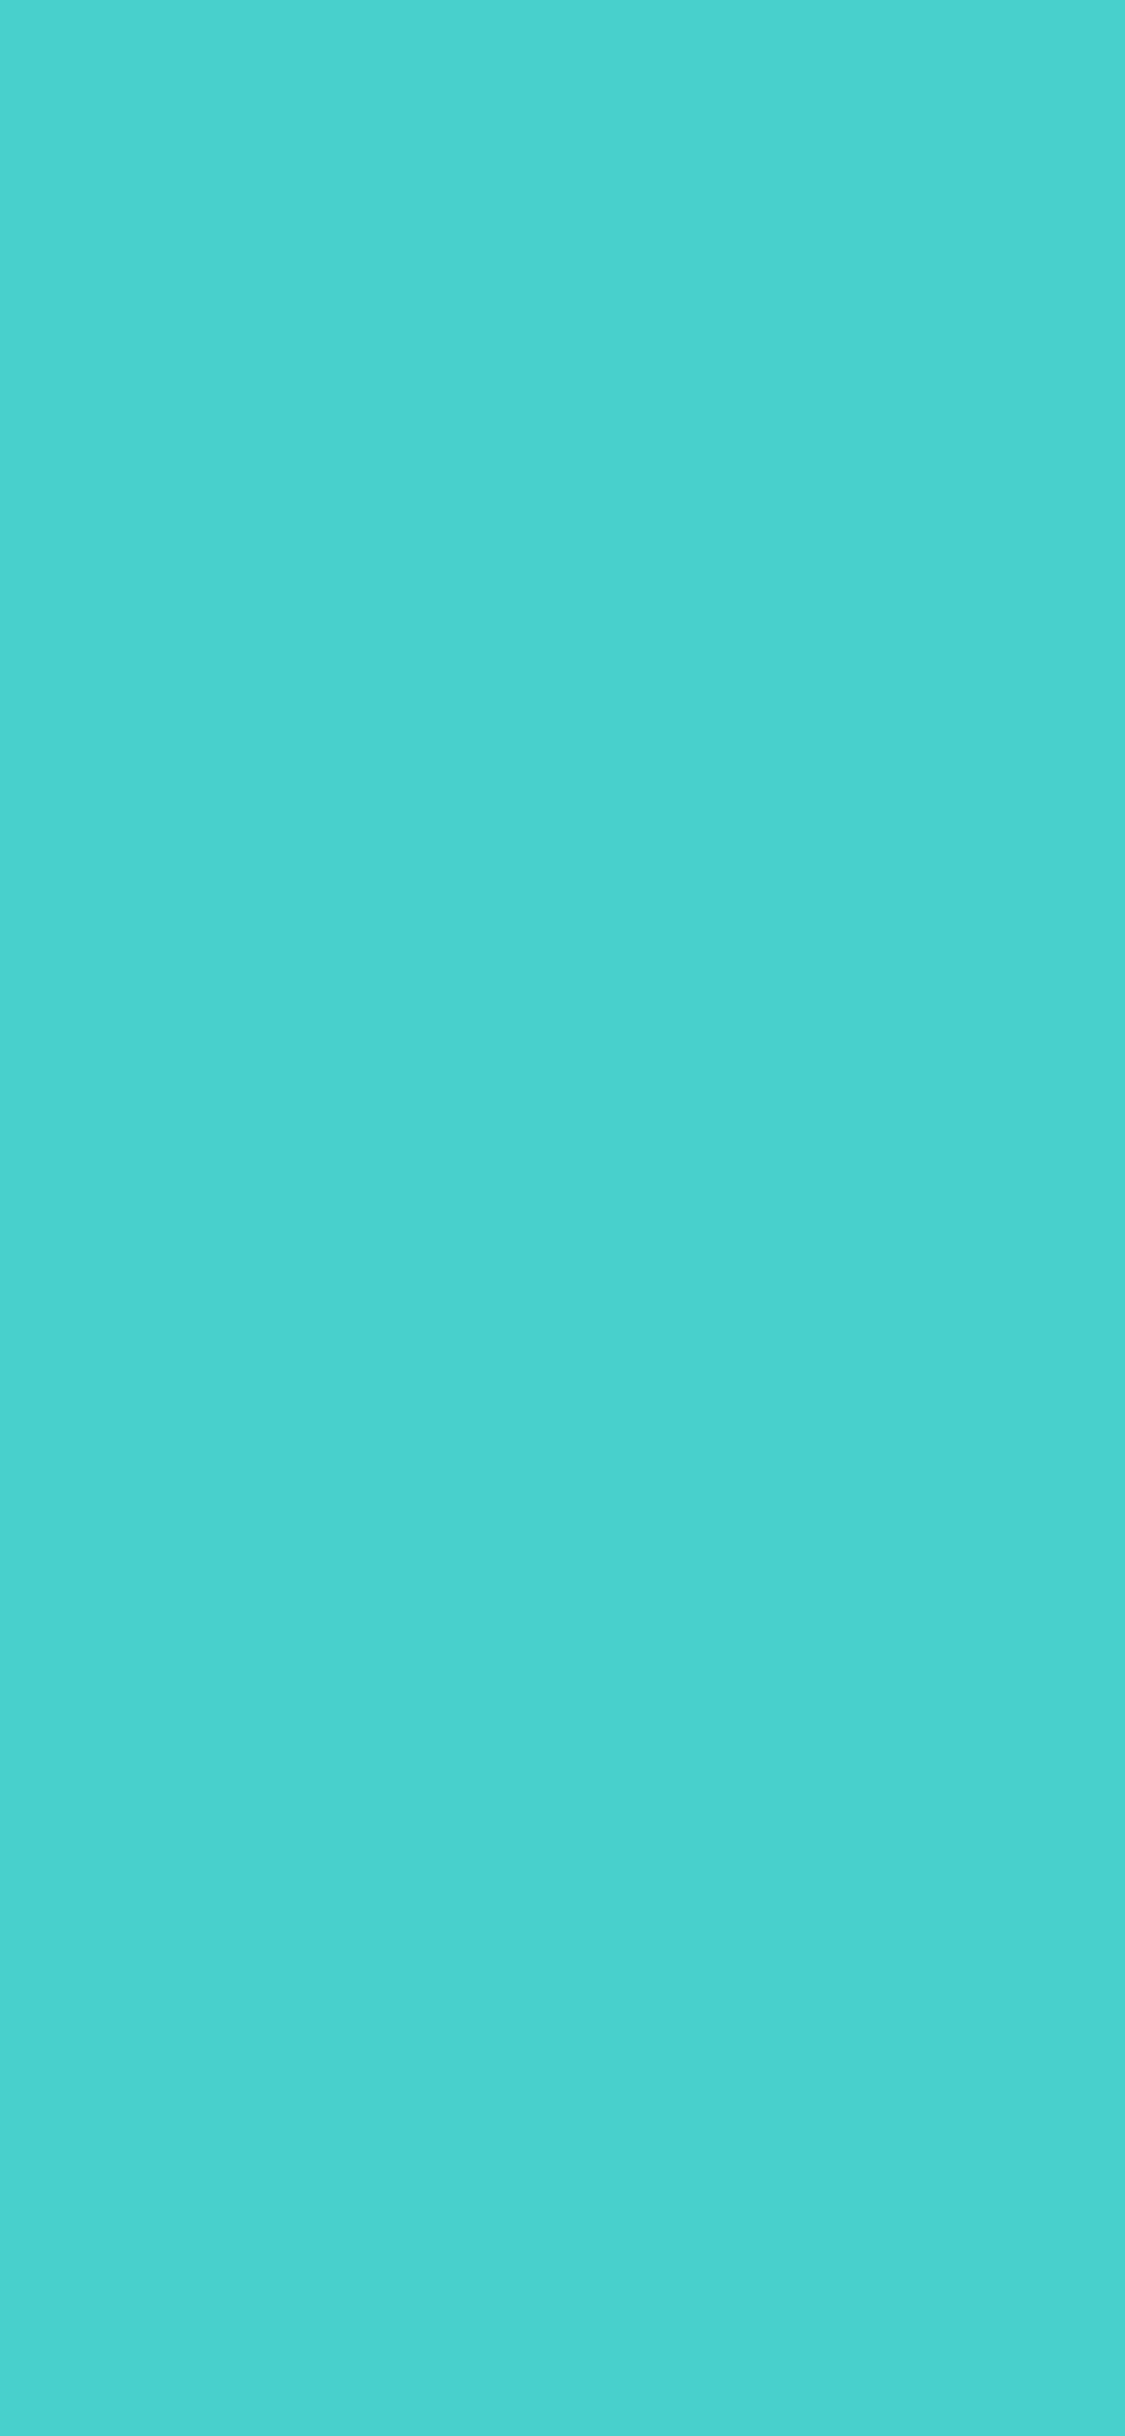 1125x2436 Medium Turquoise Solid Color Background